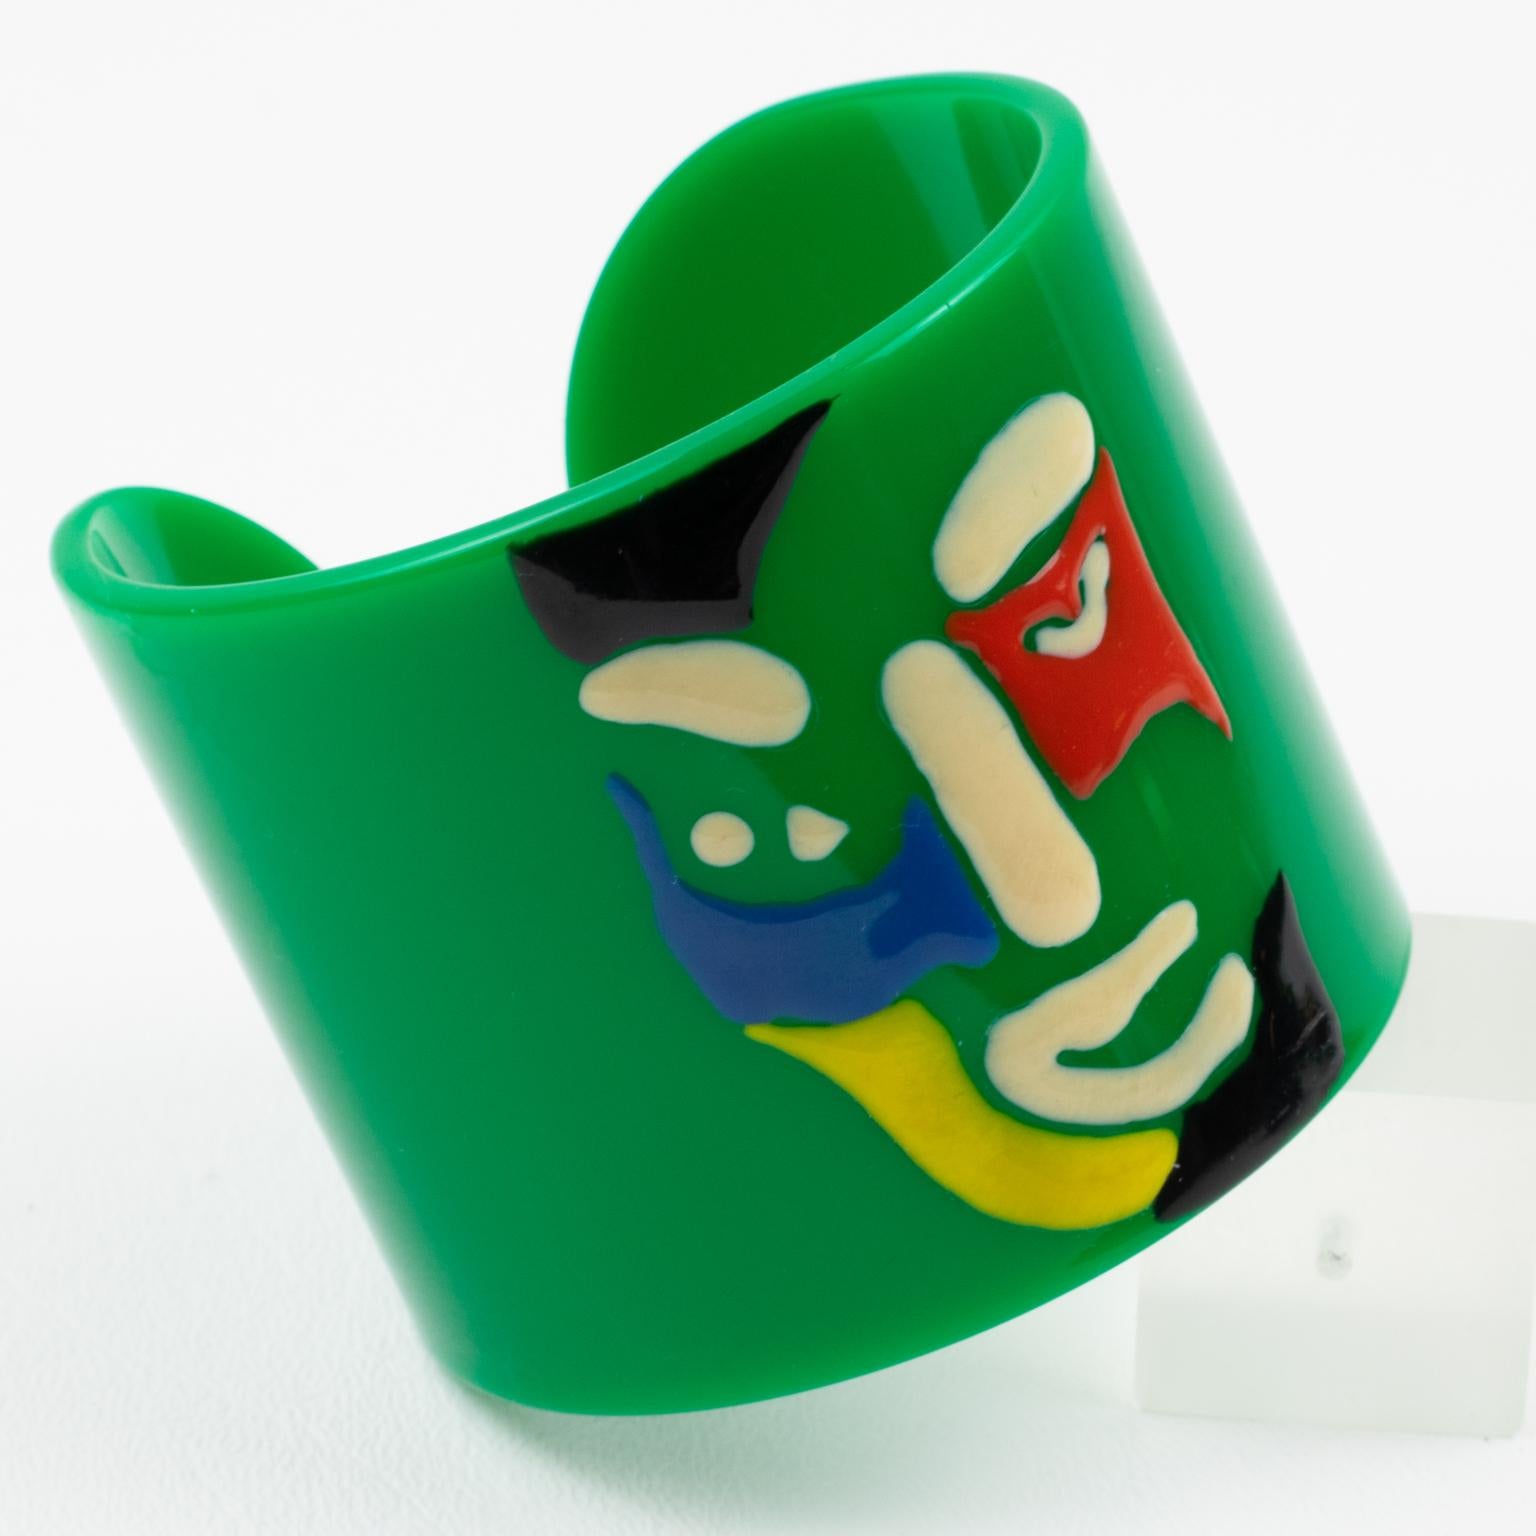 Missoni Italy 1980 Green Resin Cuff Bracelet with Multicolor Iconic Smiling Face 2